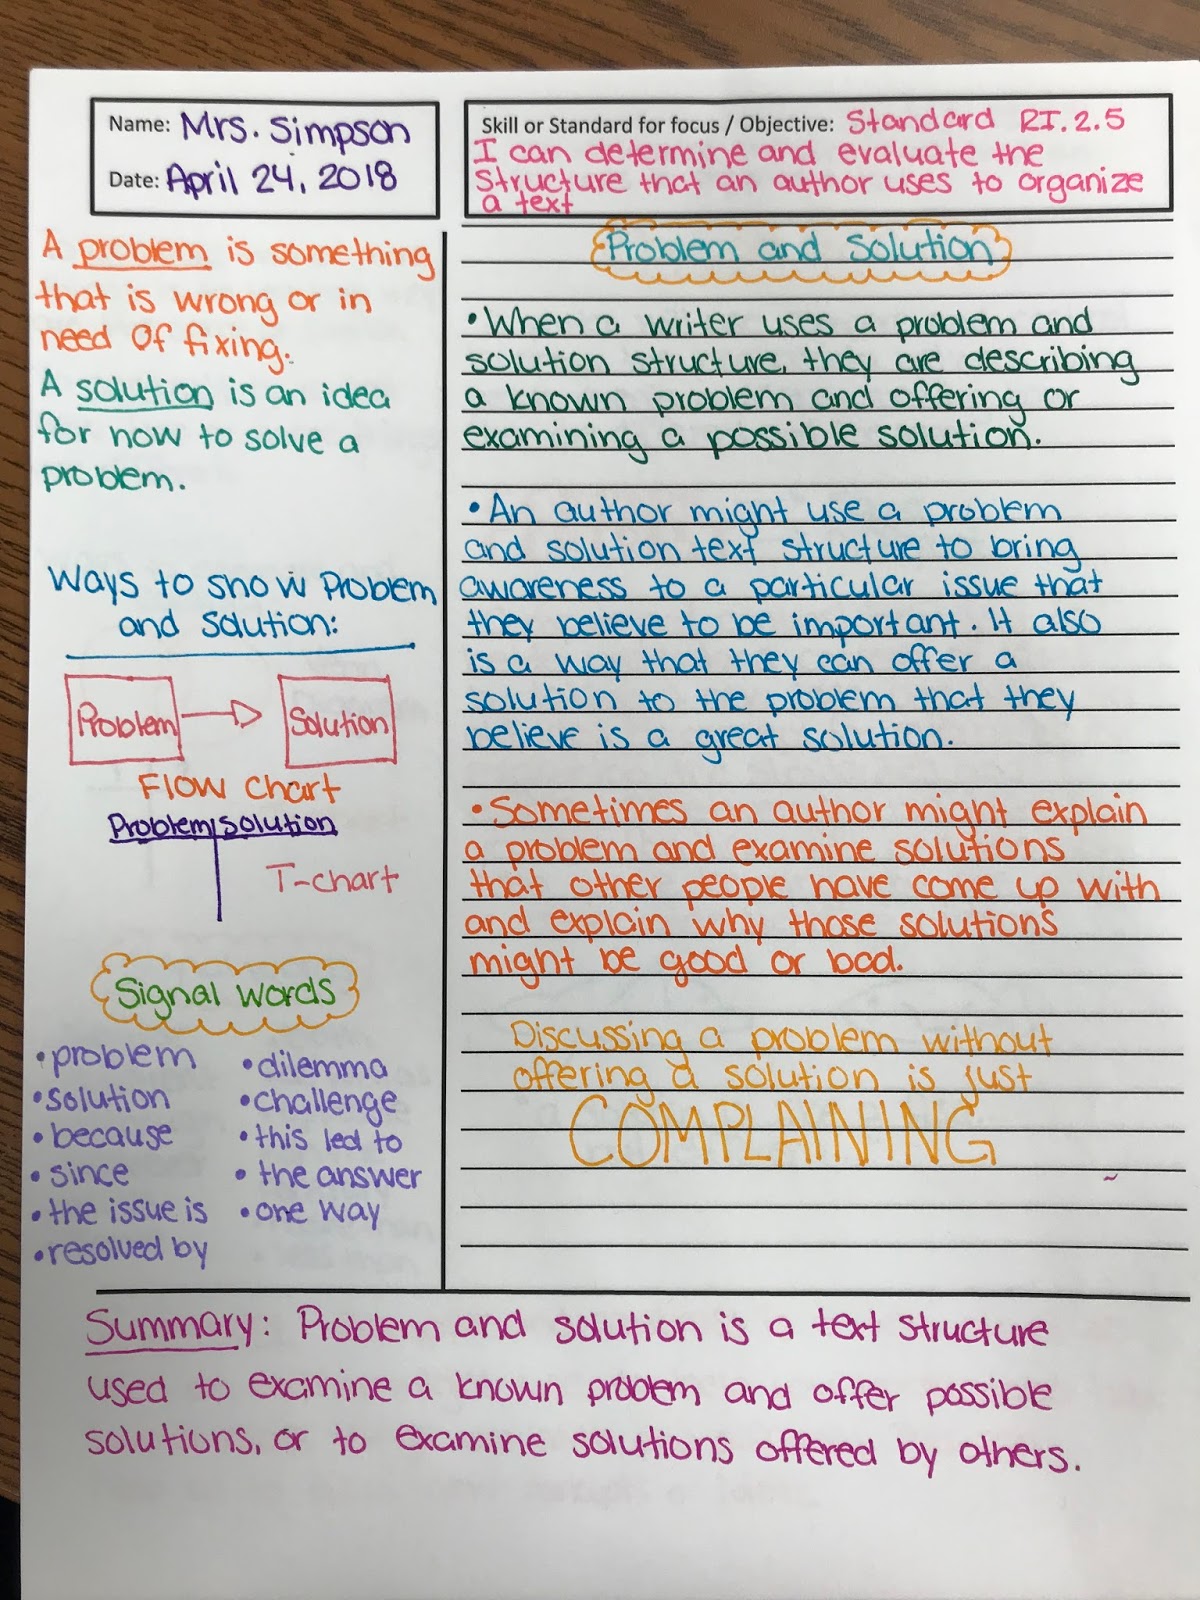 how-i-use-cornell-notes-effectively-in-my-laguage-arts-classroom-teach101